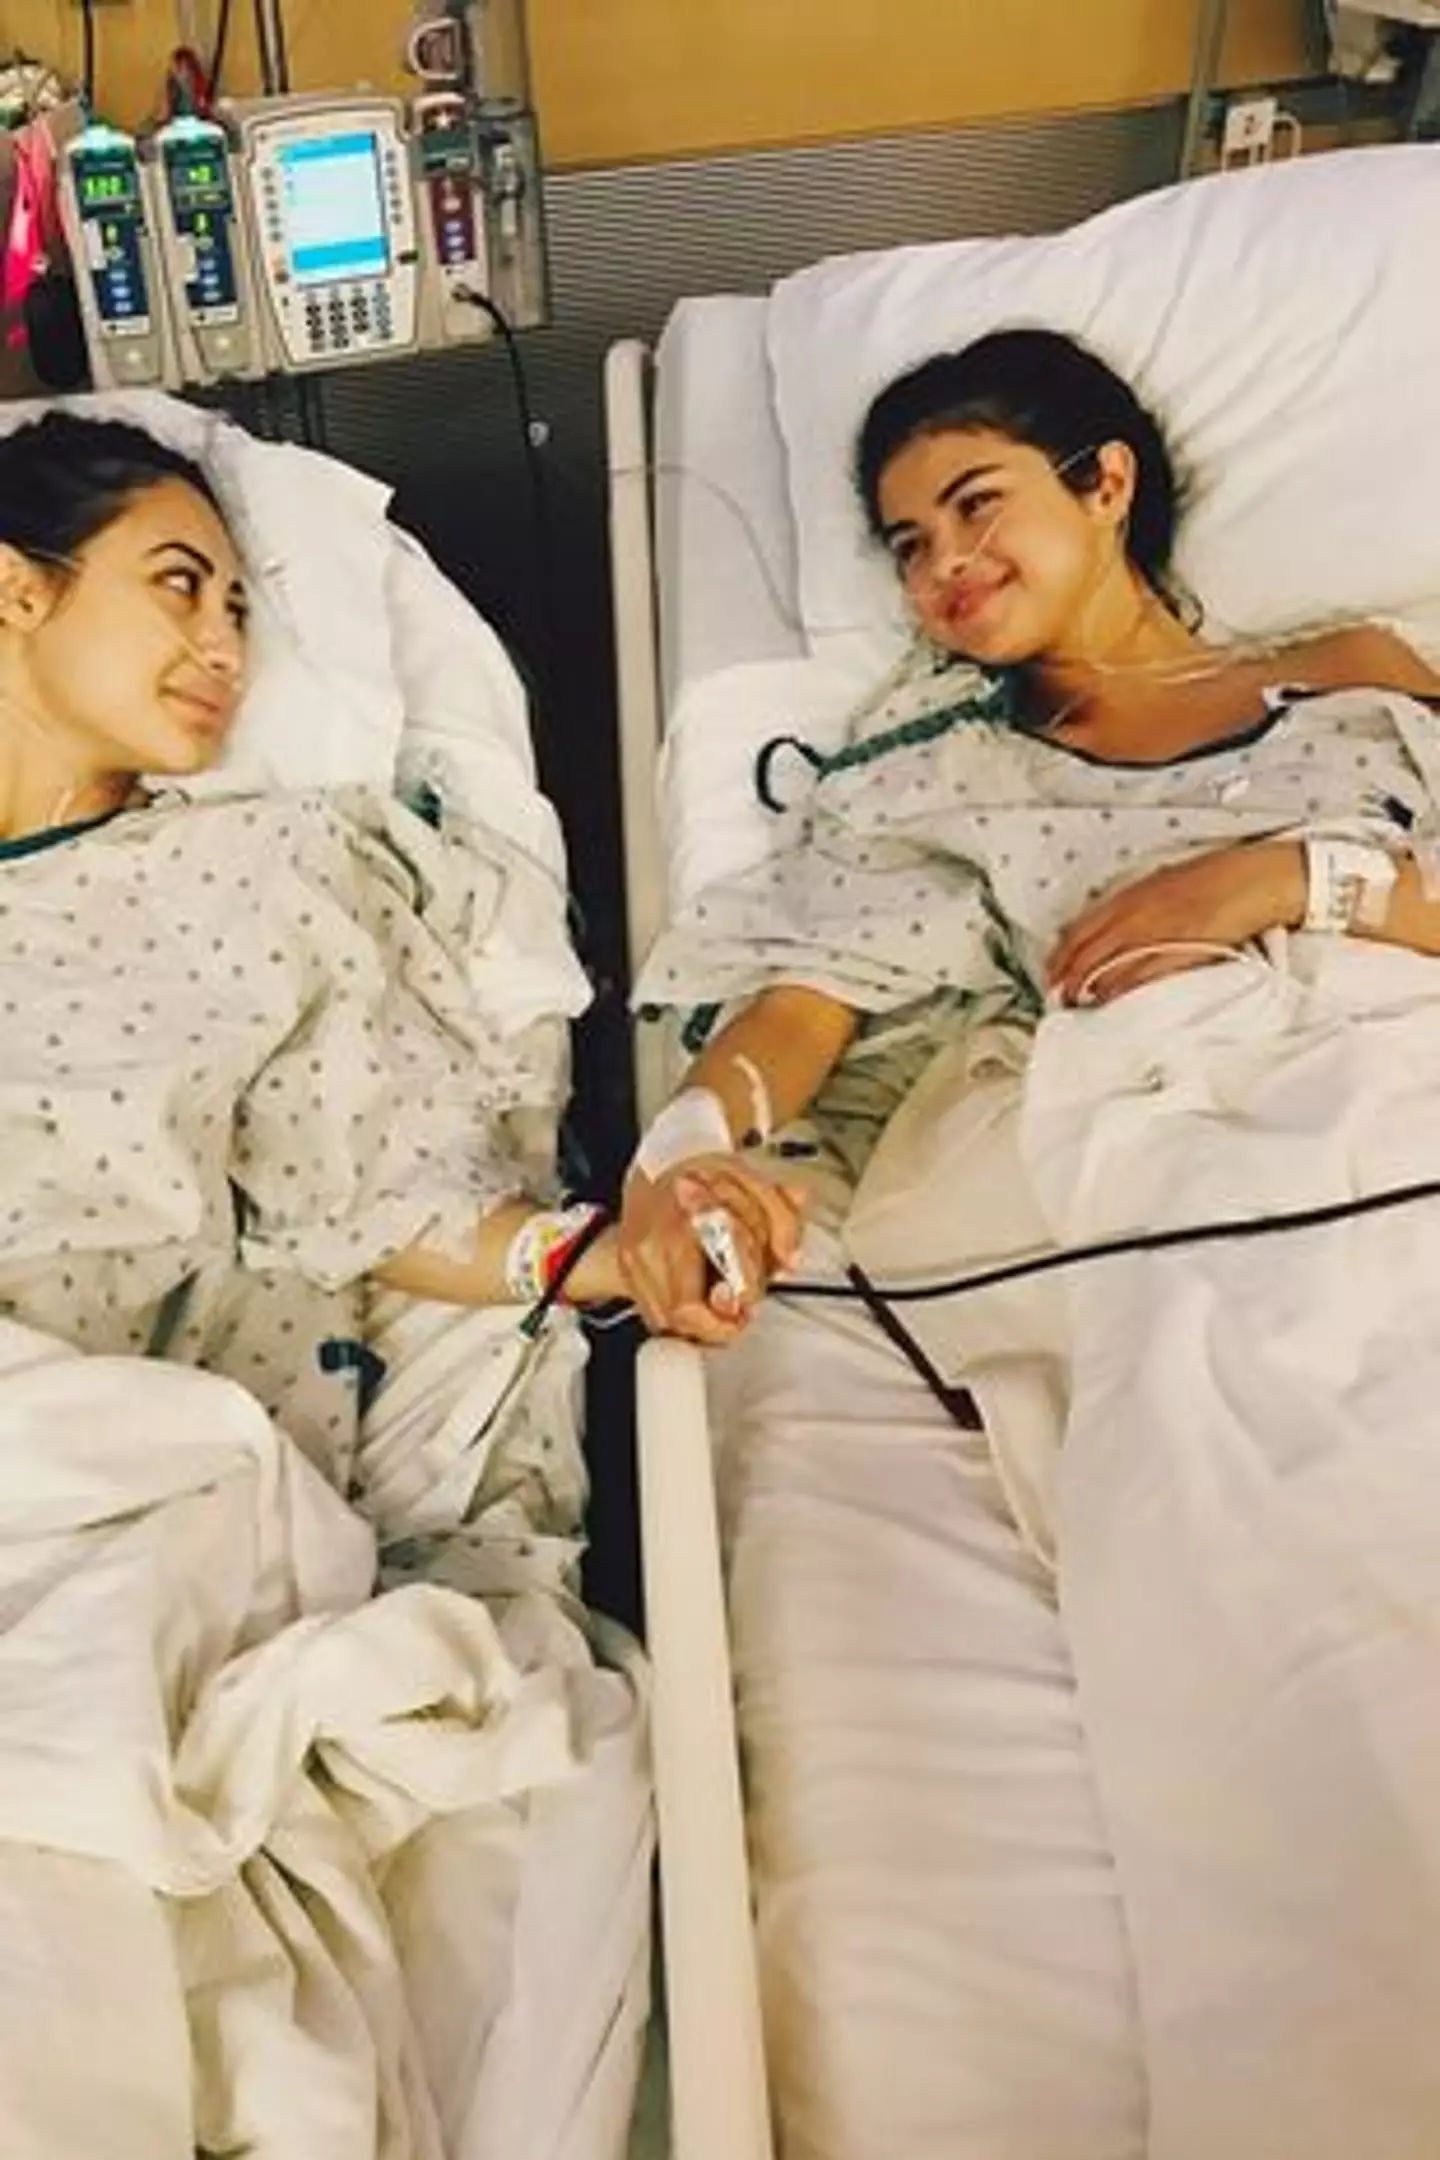 Selena Gomez's kidney donor Francia Raisa has shaded her her alleged former best friend.